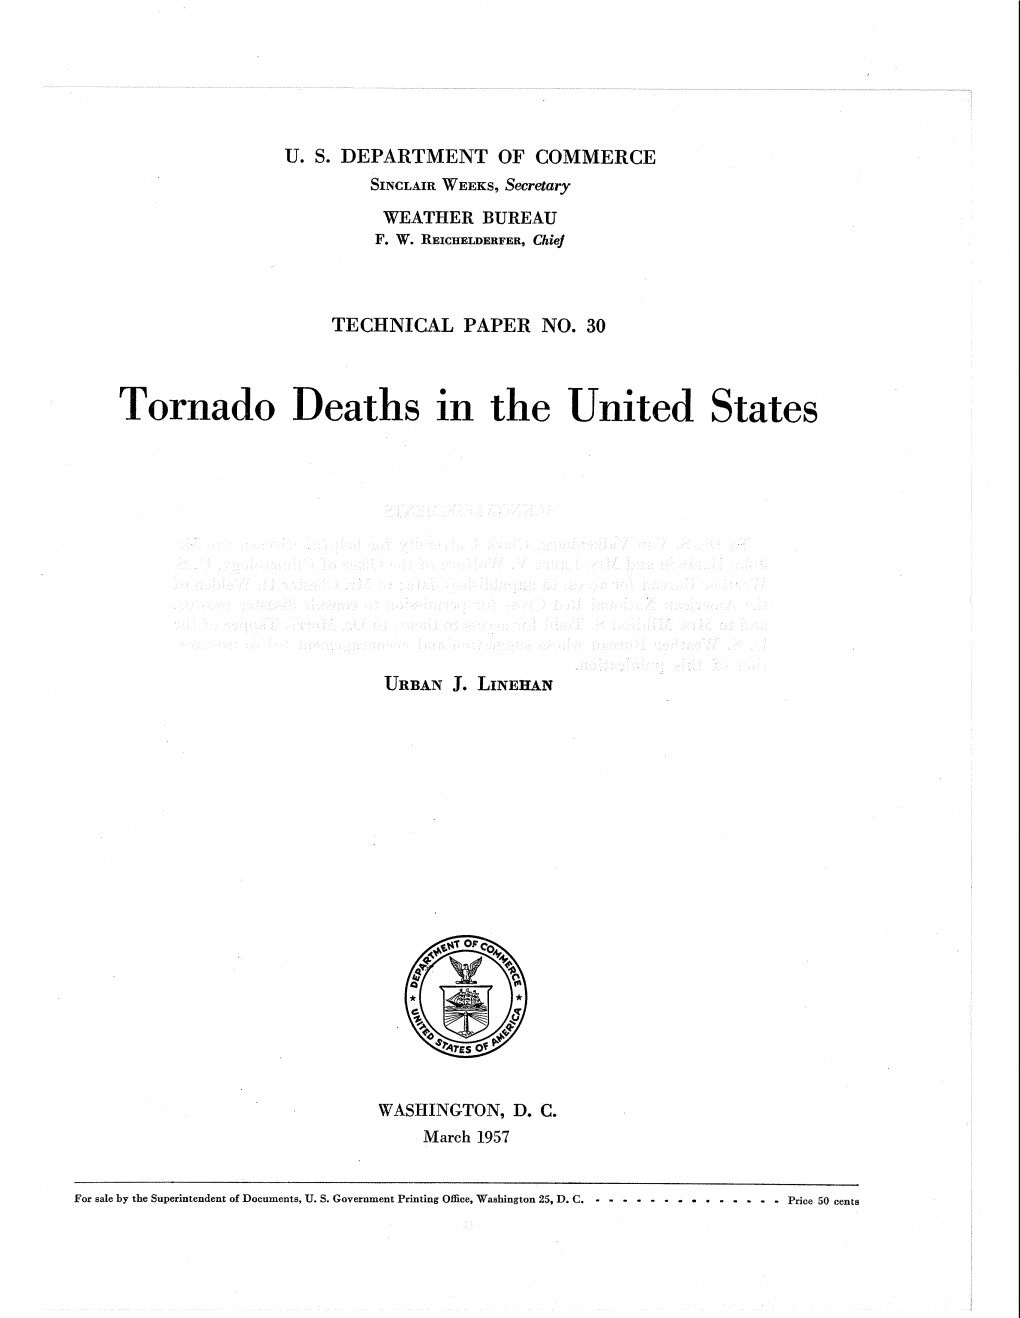 Tornado Deaths in the United States